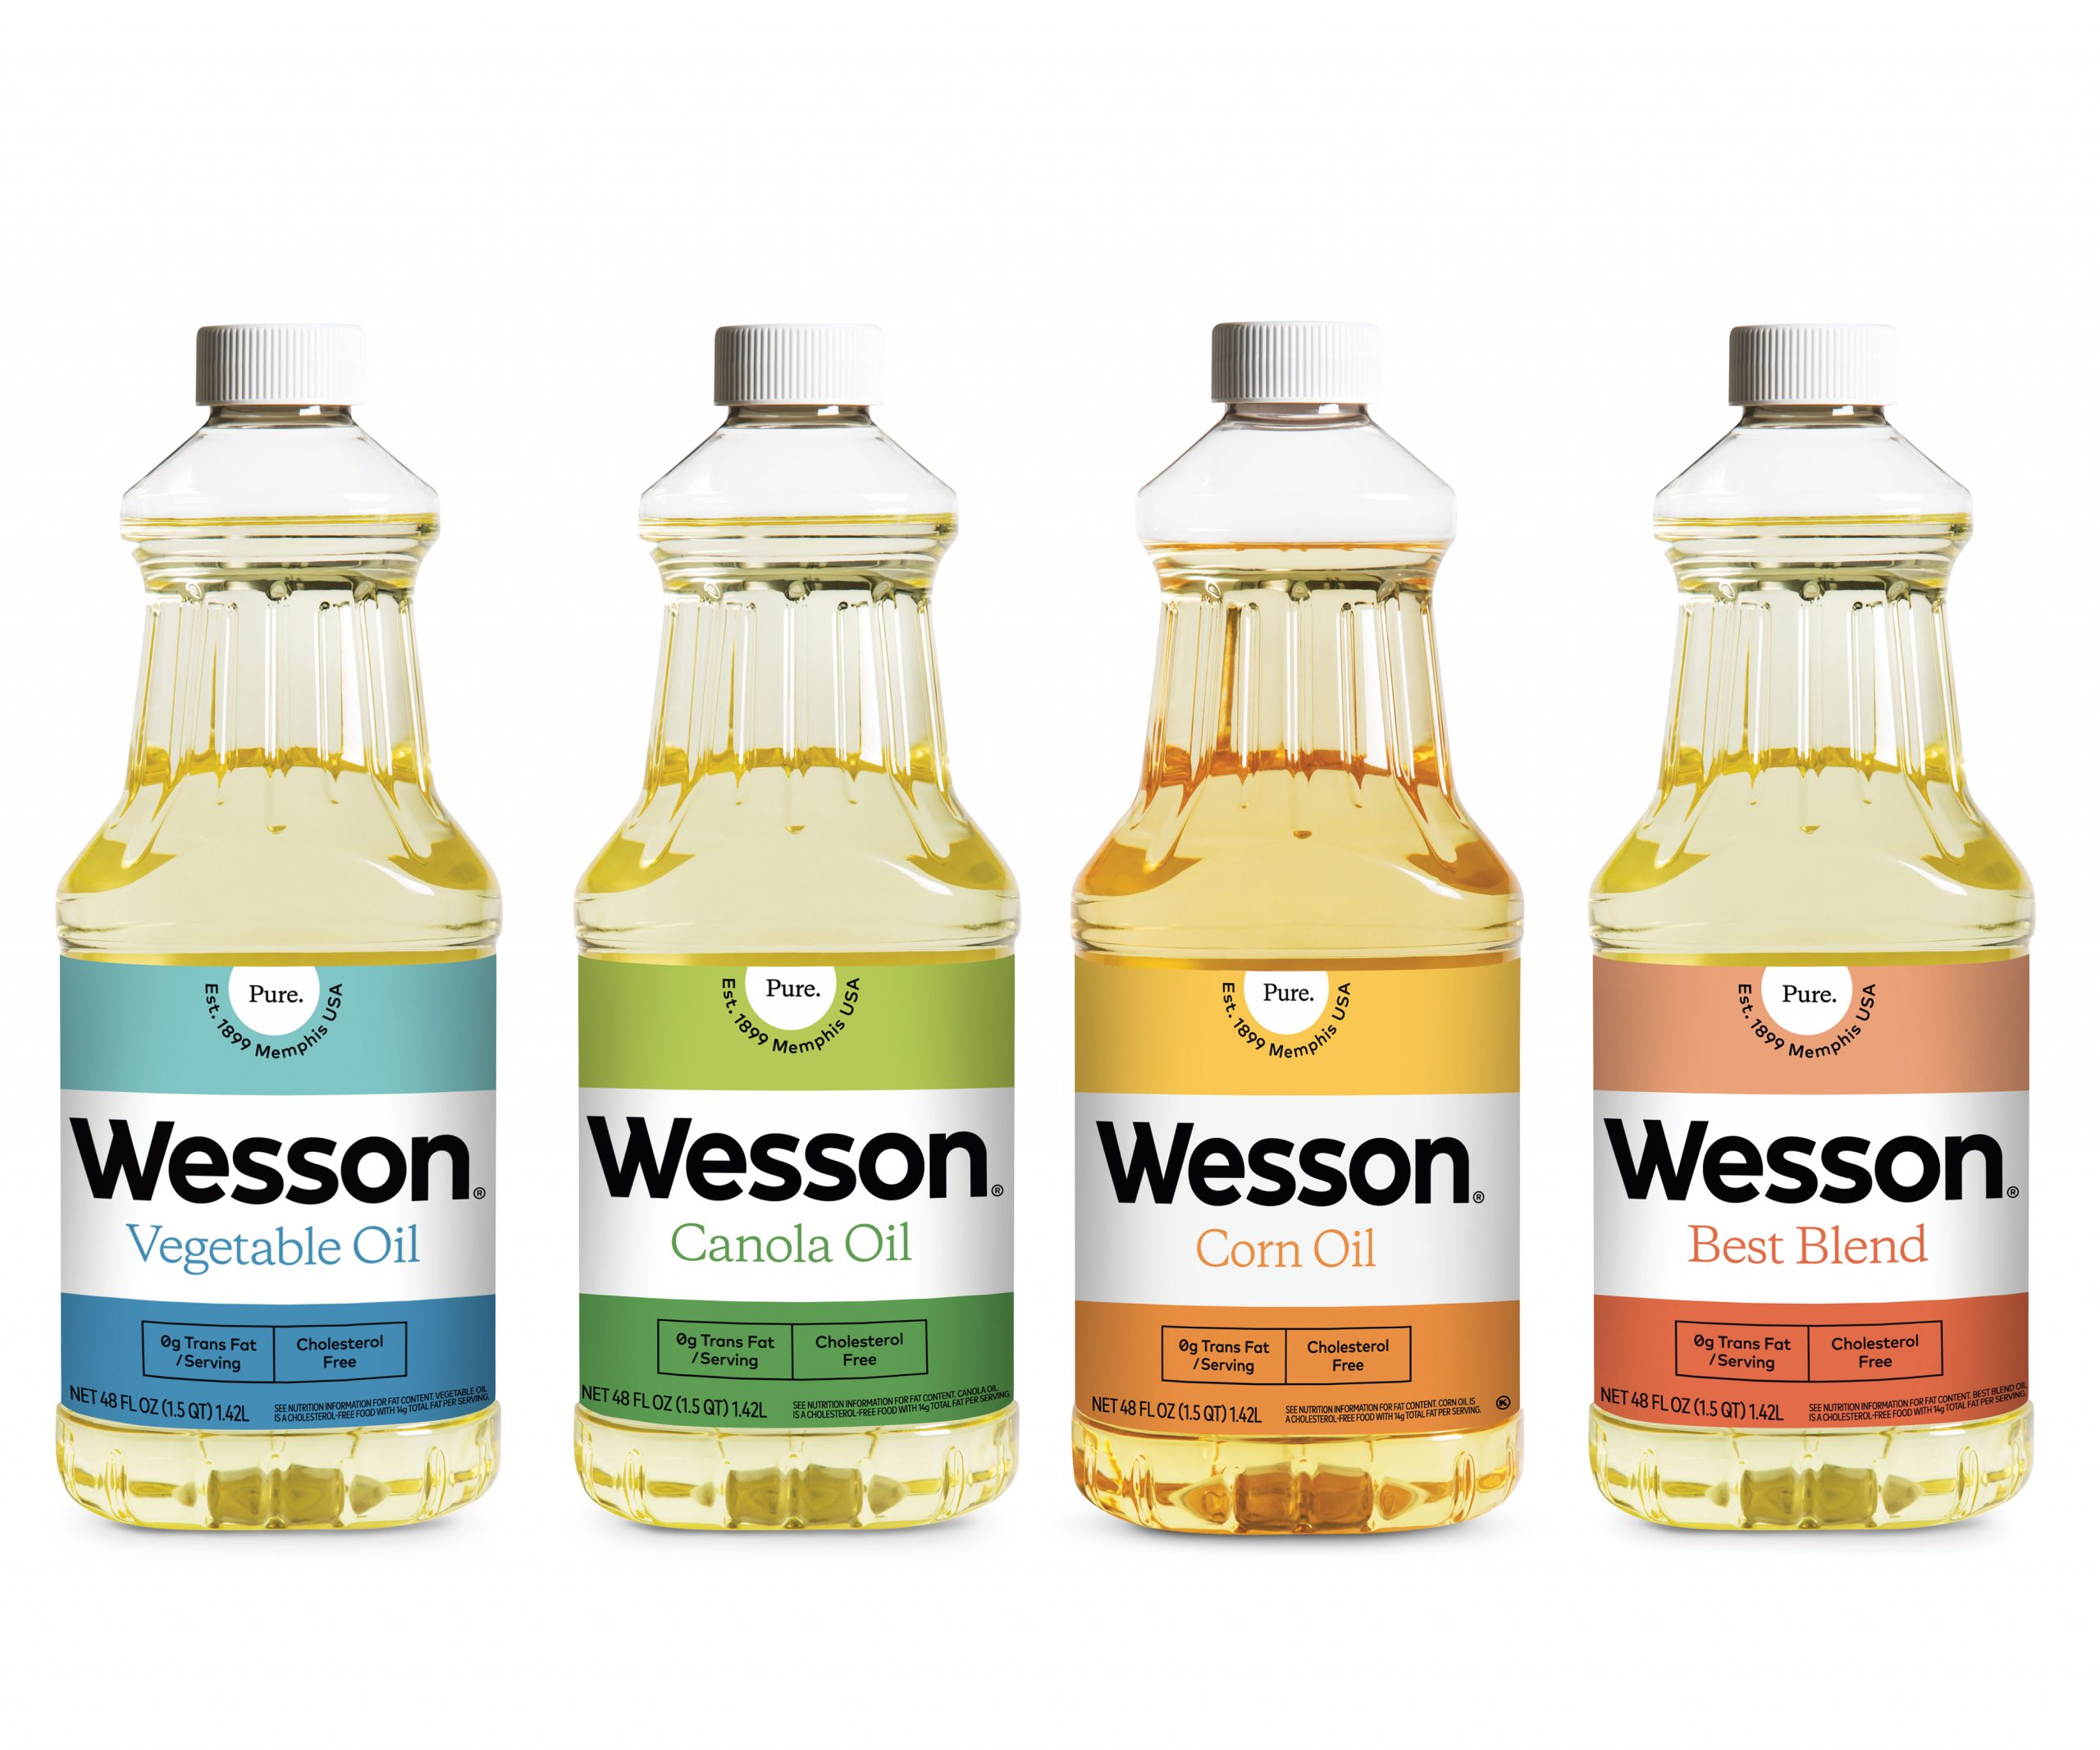 Featured image for “Market leader Wesson Oil returns to spotlight with major brand refresh”